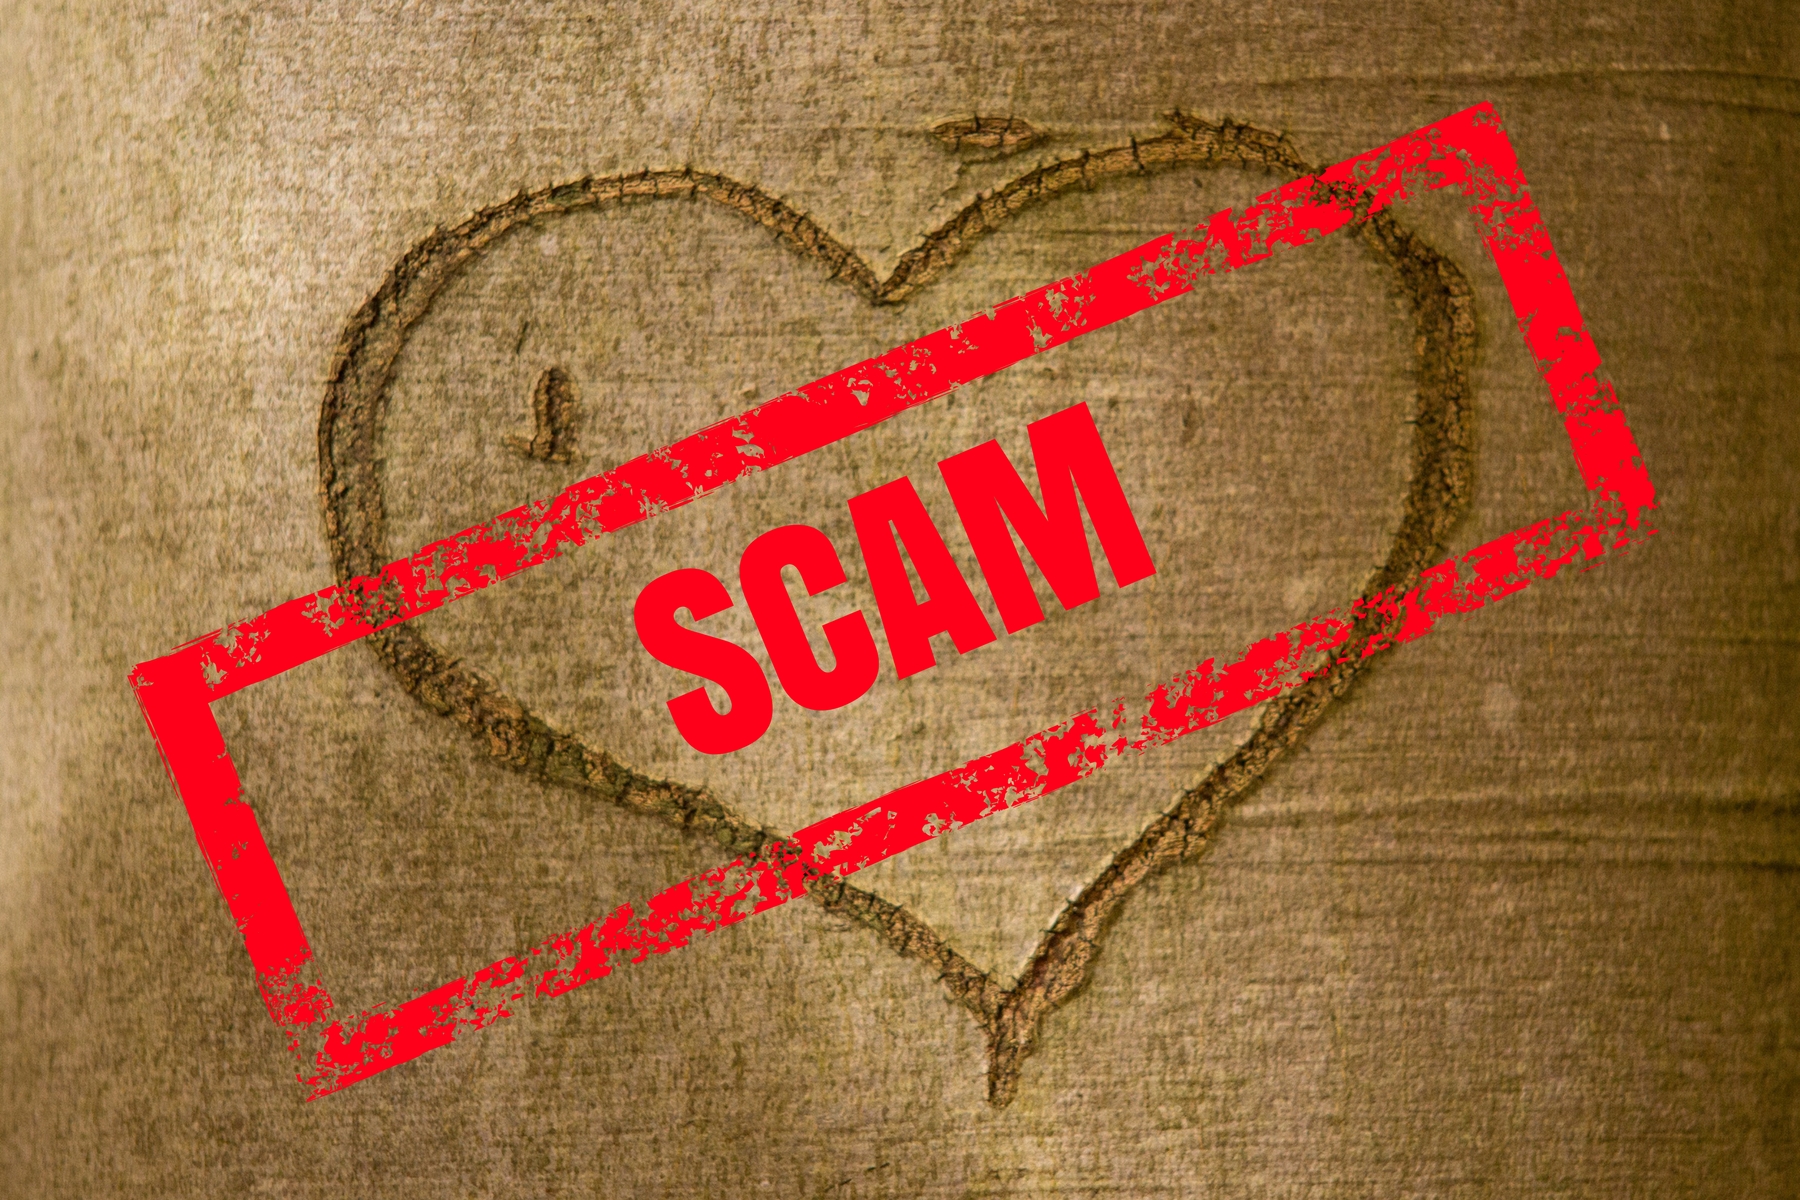 Facebook military romance scams Army general